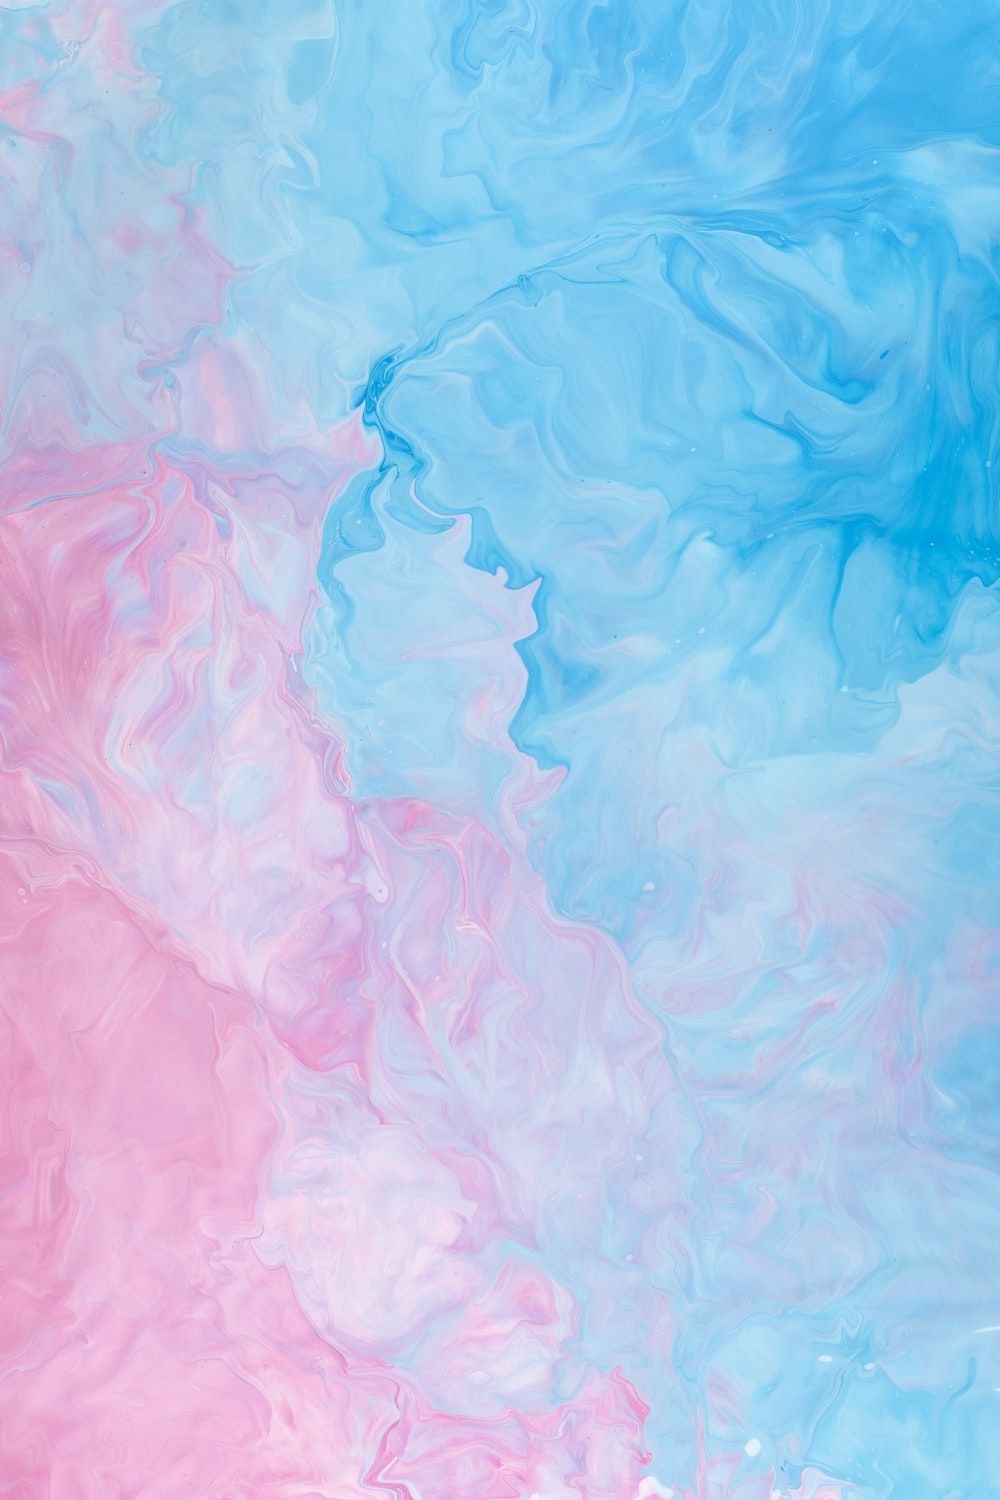 A painting of blue and pink paint - Aqua